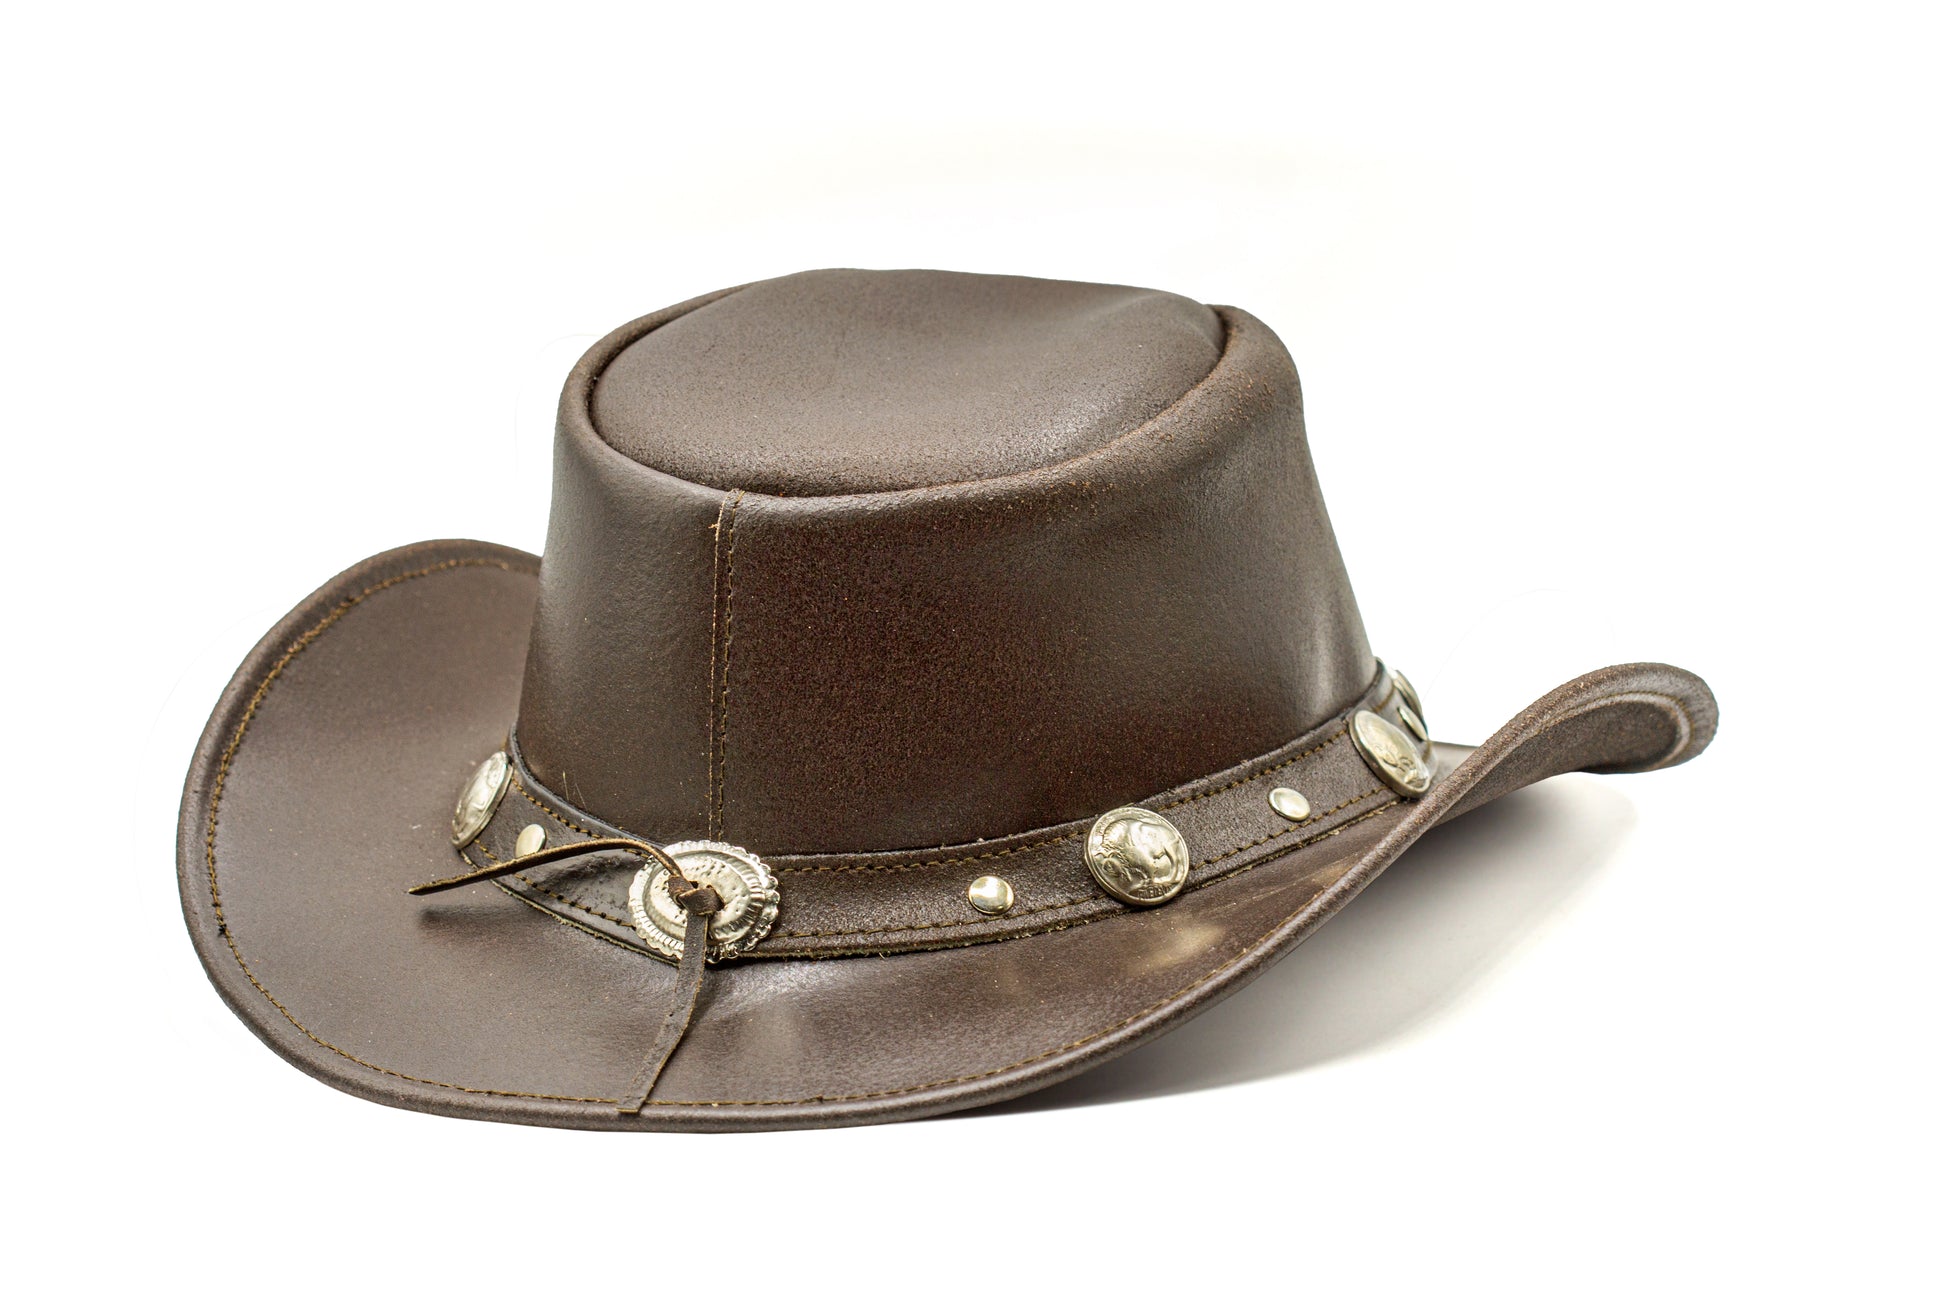 brown leather cowboy hat western style shapeable as outback best gift for men women him her mom dad boyfriend girlfriend friends 